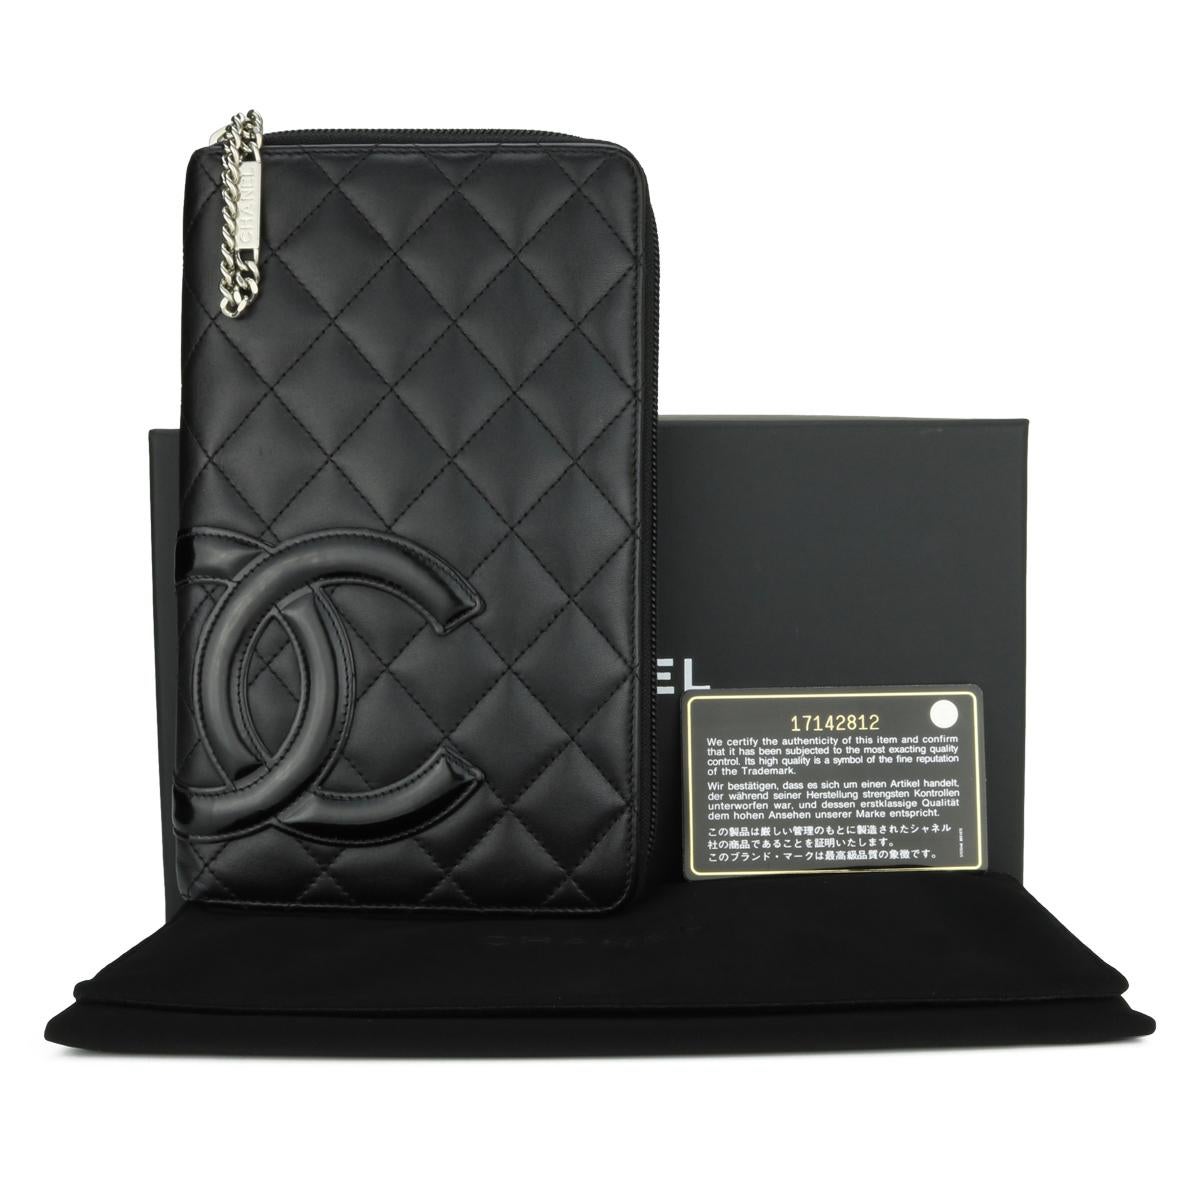 CHANEL Quilted Cambon Long Zipped Wallet Black Calfskin with Silver Hardware 2013.

This stunning zip wallet is in very good condition, the wallet still holds its original shape, and the hardware is still very shiny. Such a gorgeous, functional long